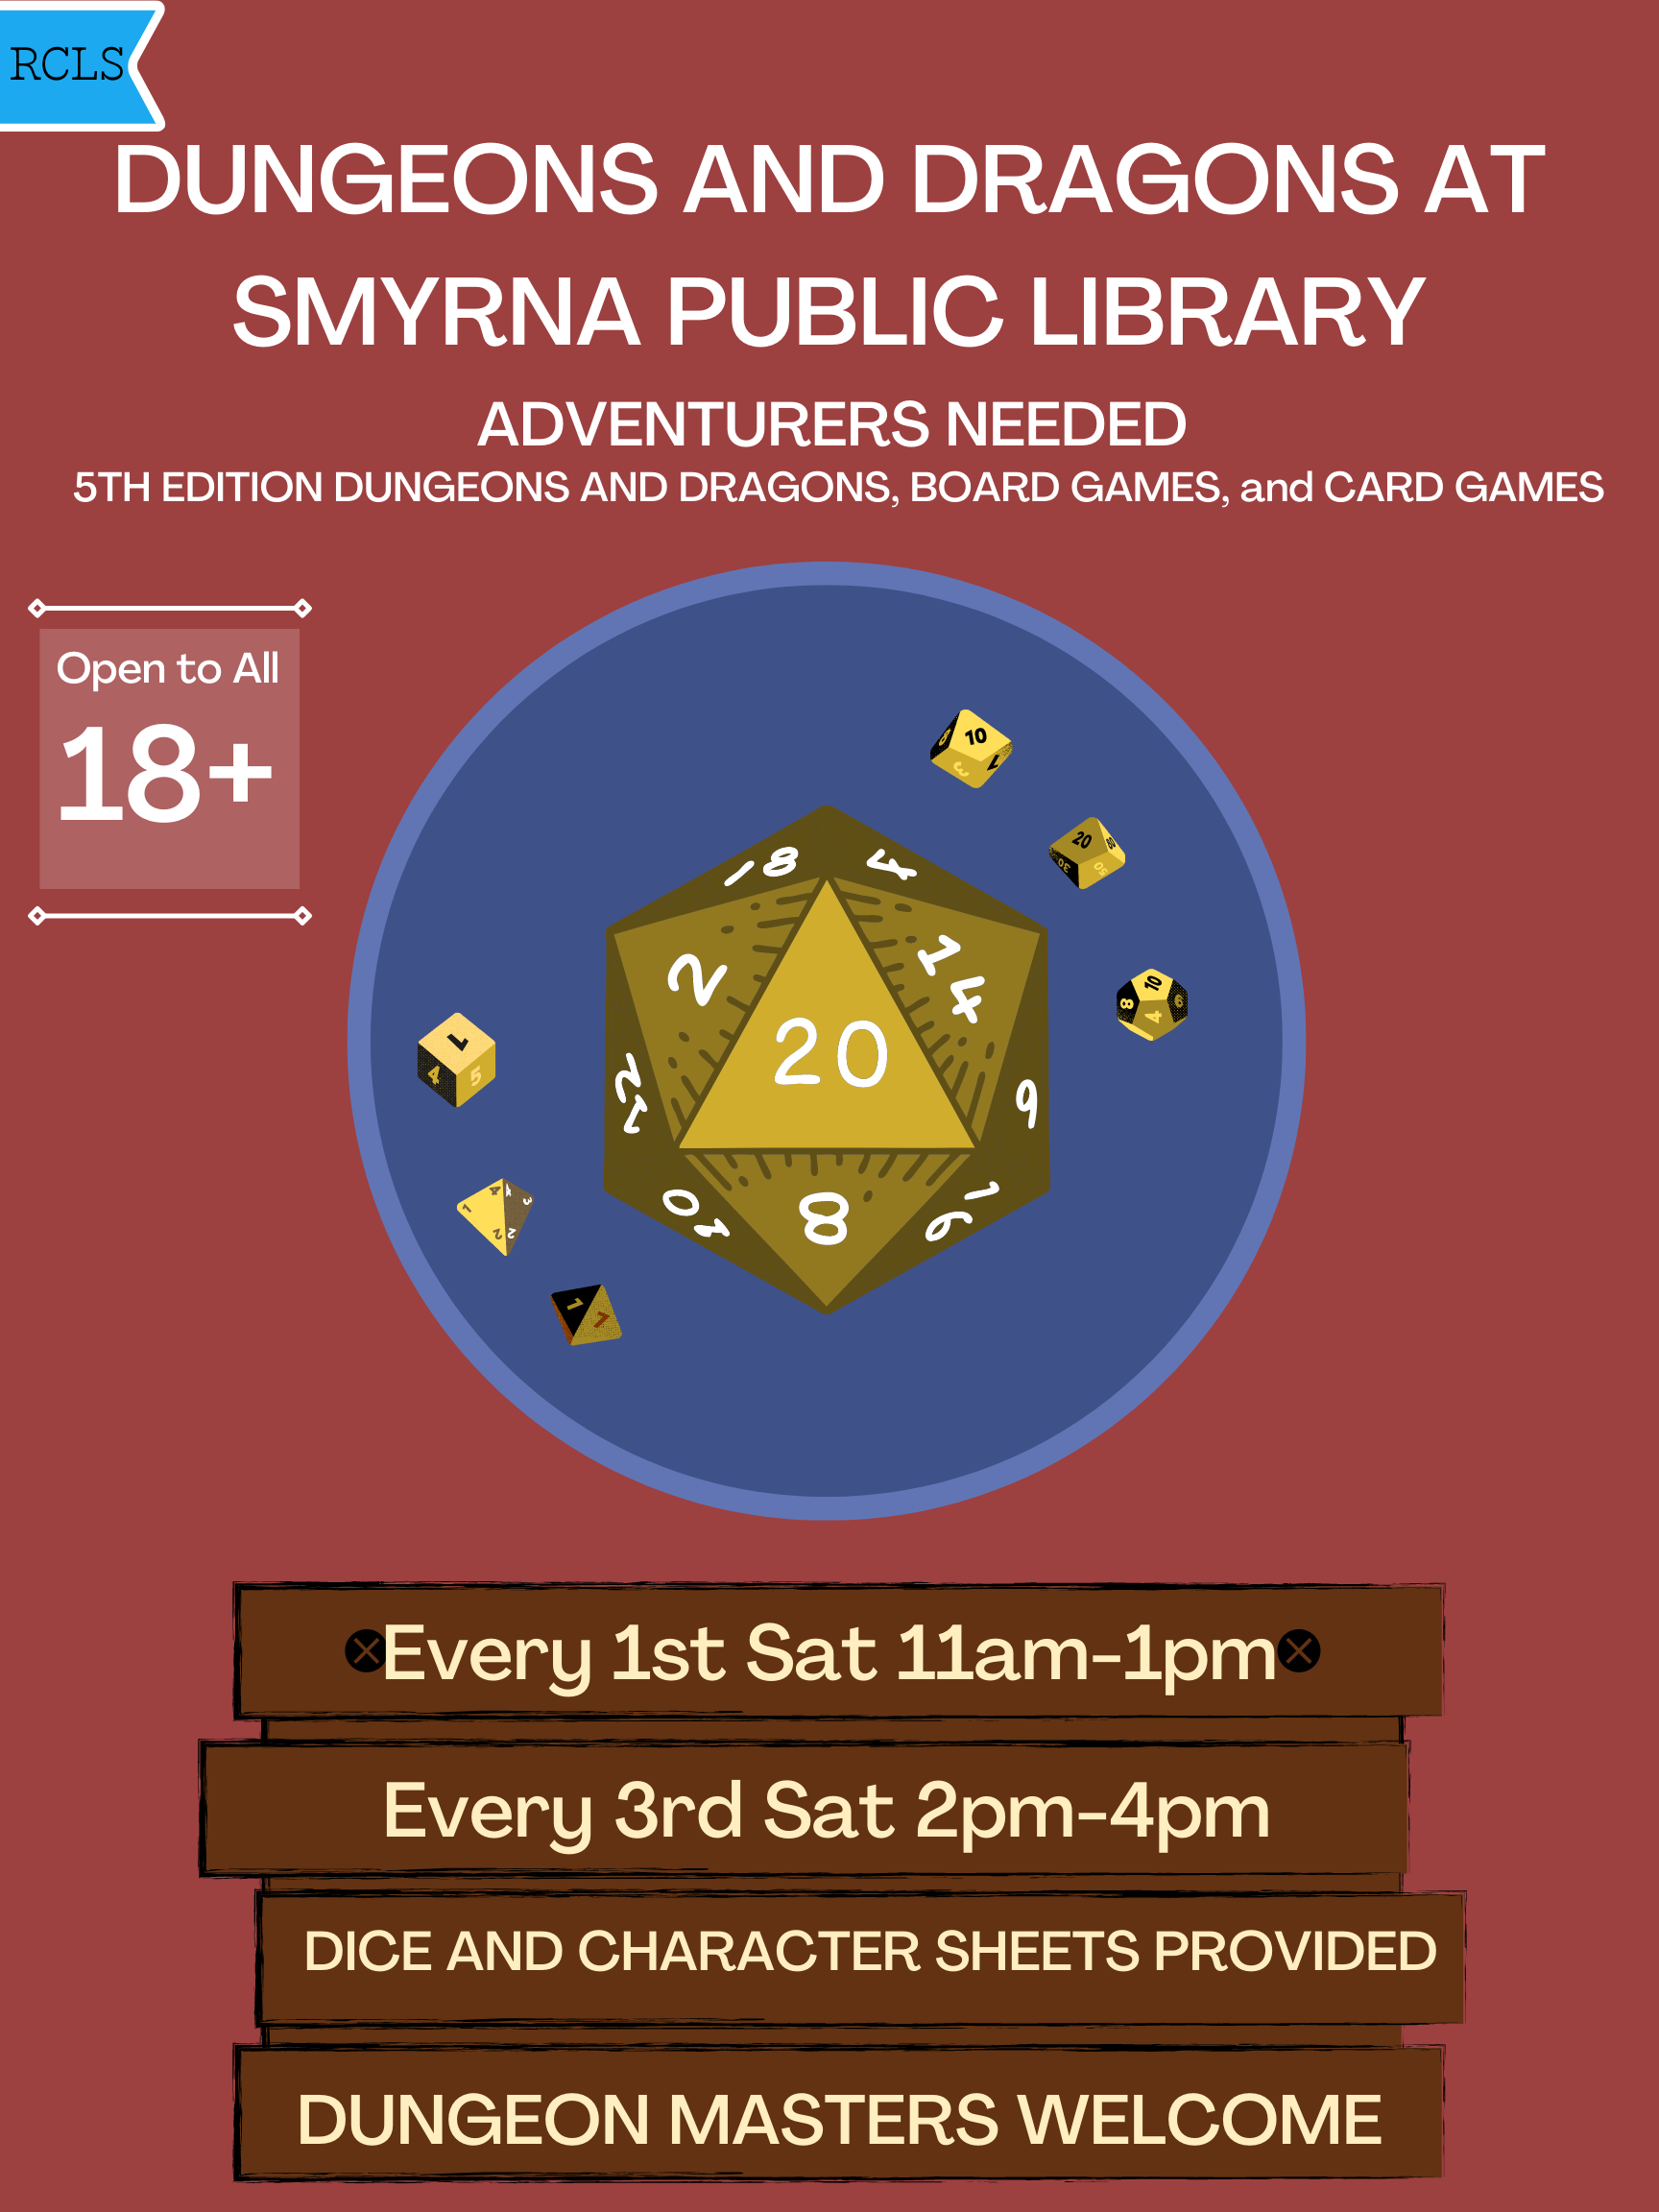 Dungeons & Dragons at the Smyrna Public Library, Every 1st Saturday of the month from 11am-1pm, every 3rd Saturday of the month from 2pm-4pm